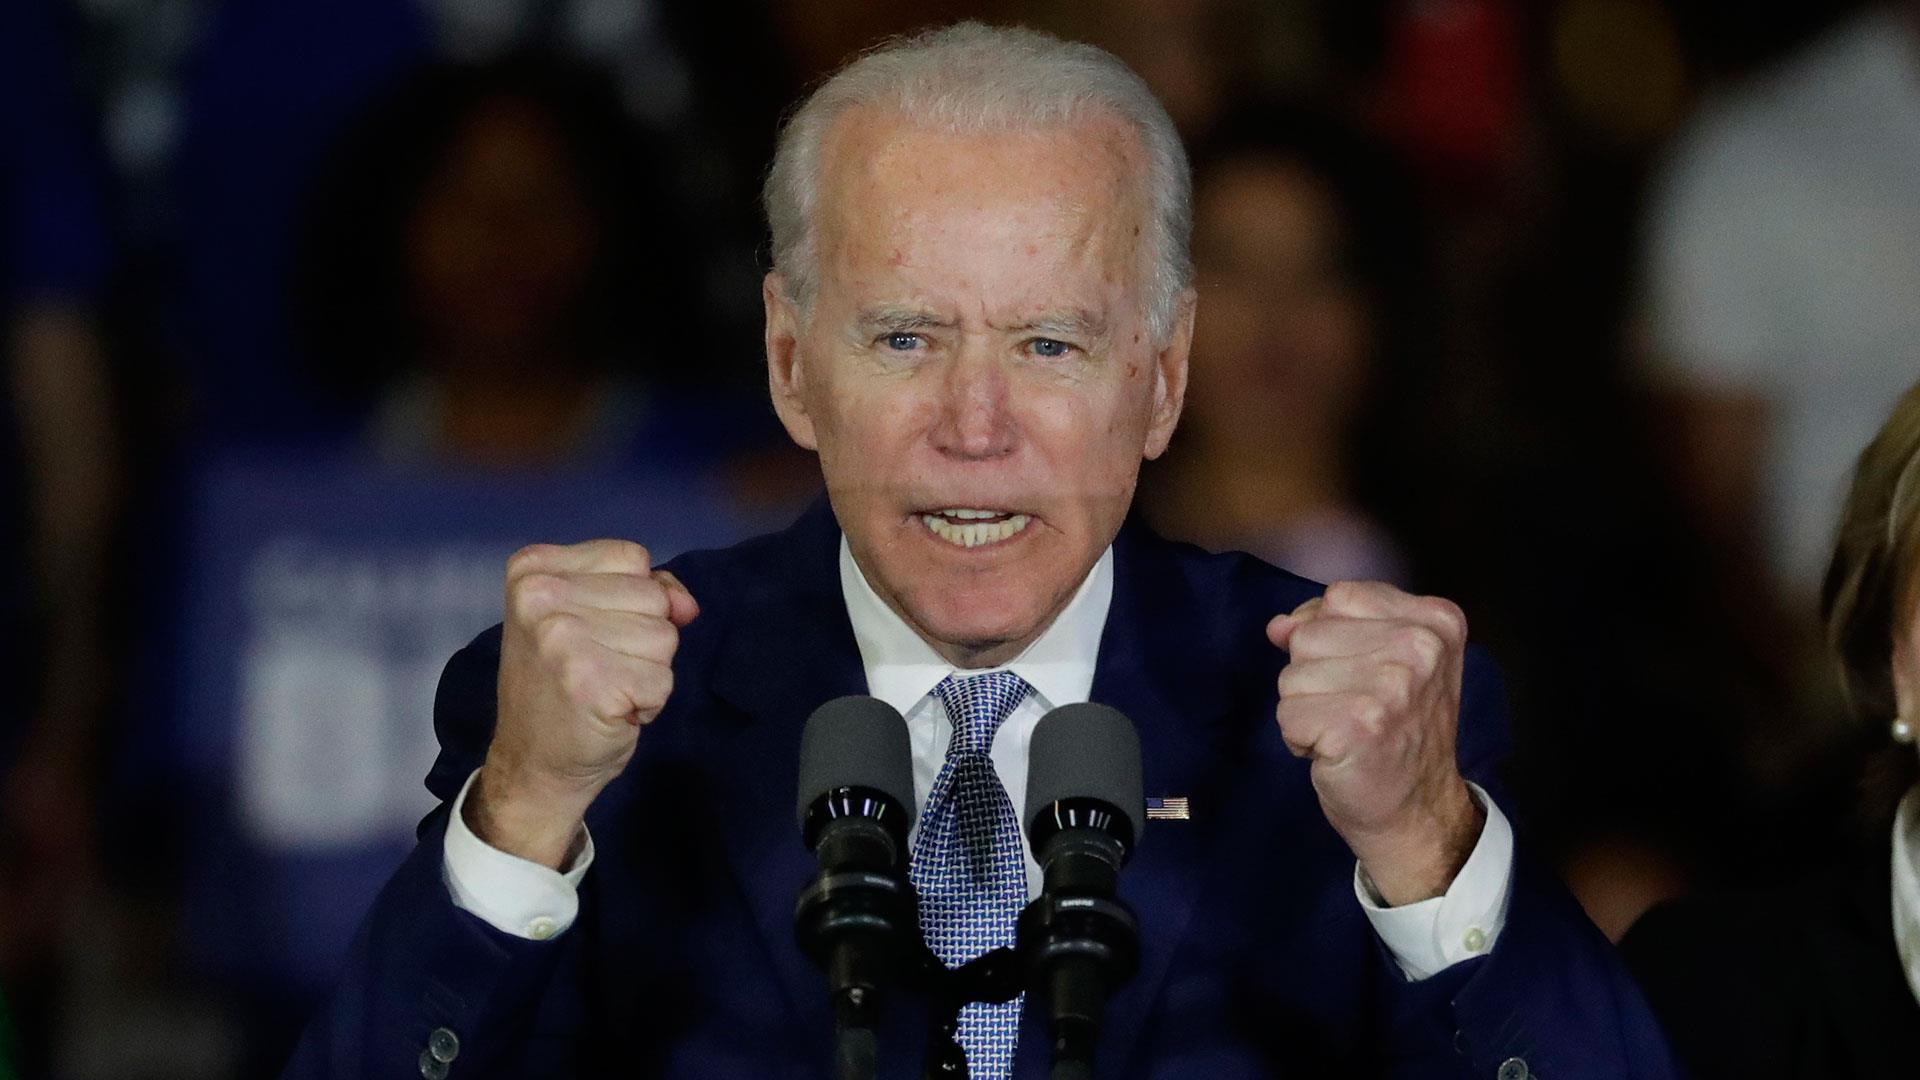 Biden finds his mojo on Super Tuesday